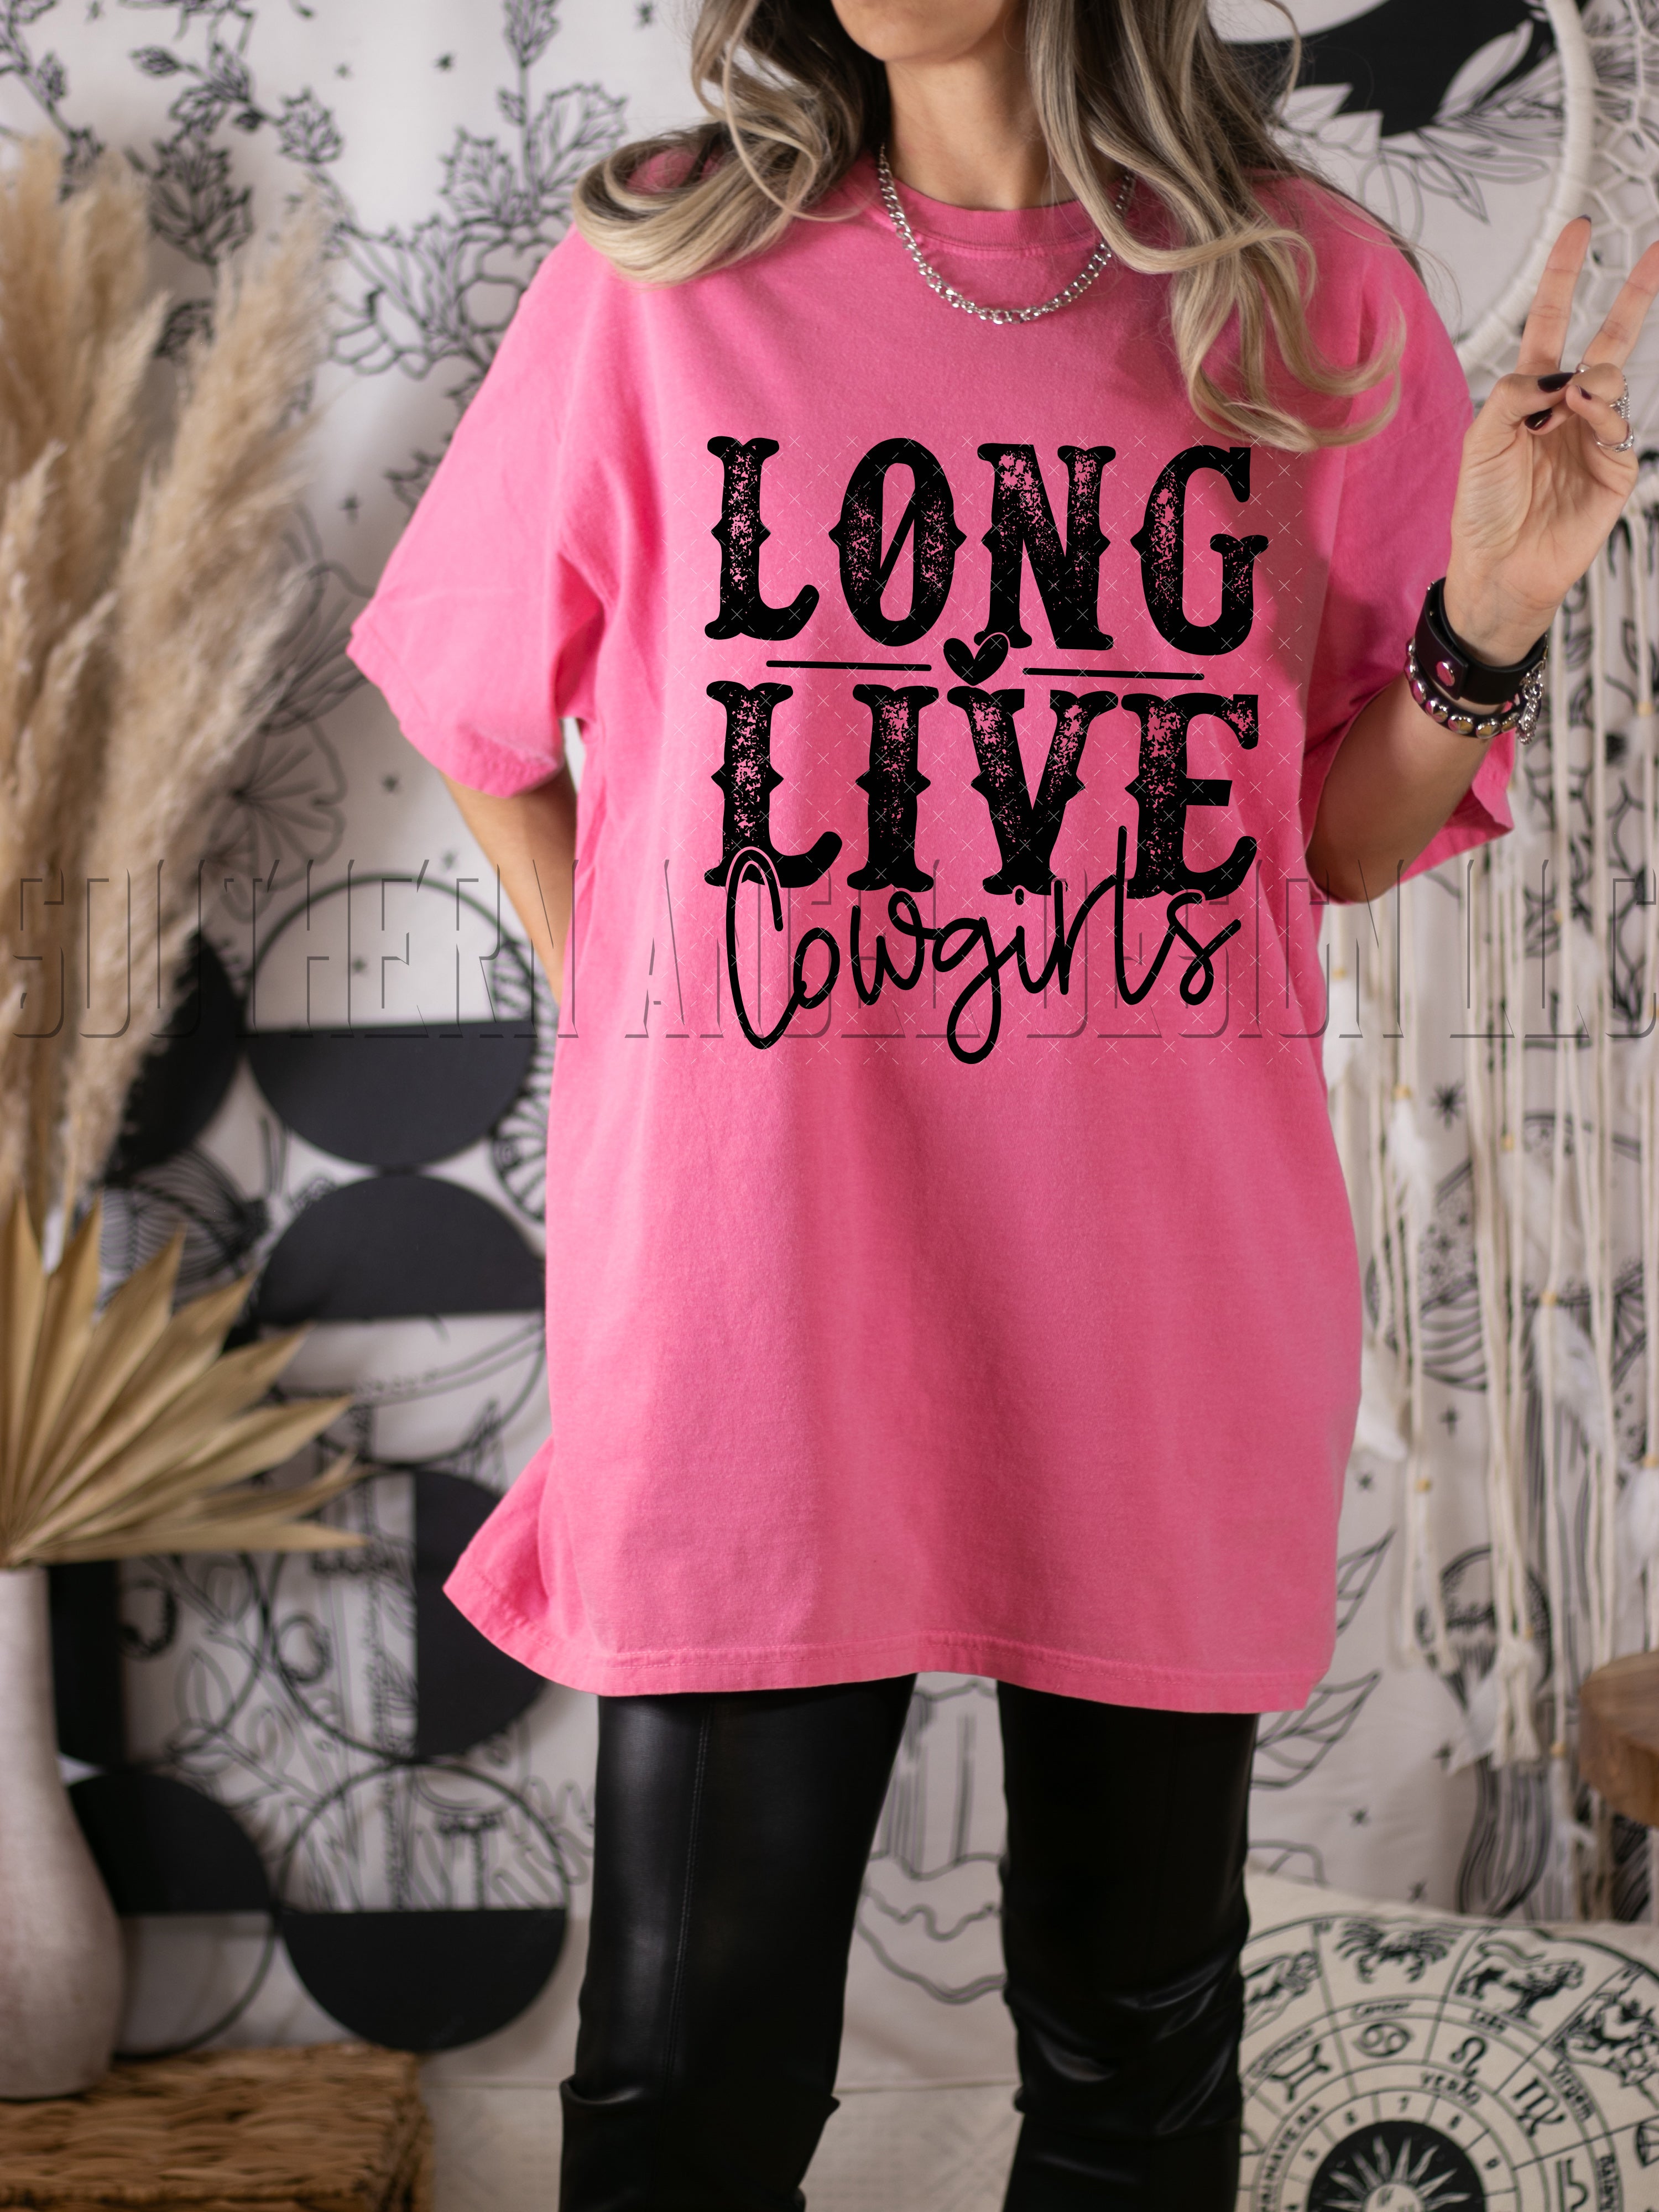 Rosy Brown Long Live Cowgirls t-shirt image_e7b373d1-d999-428e-88a4-6e10e874b82b.jpg long-live-cowgirls-1 Concert & Rodeo